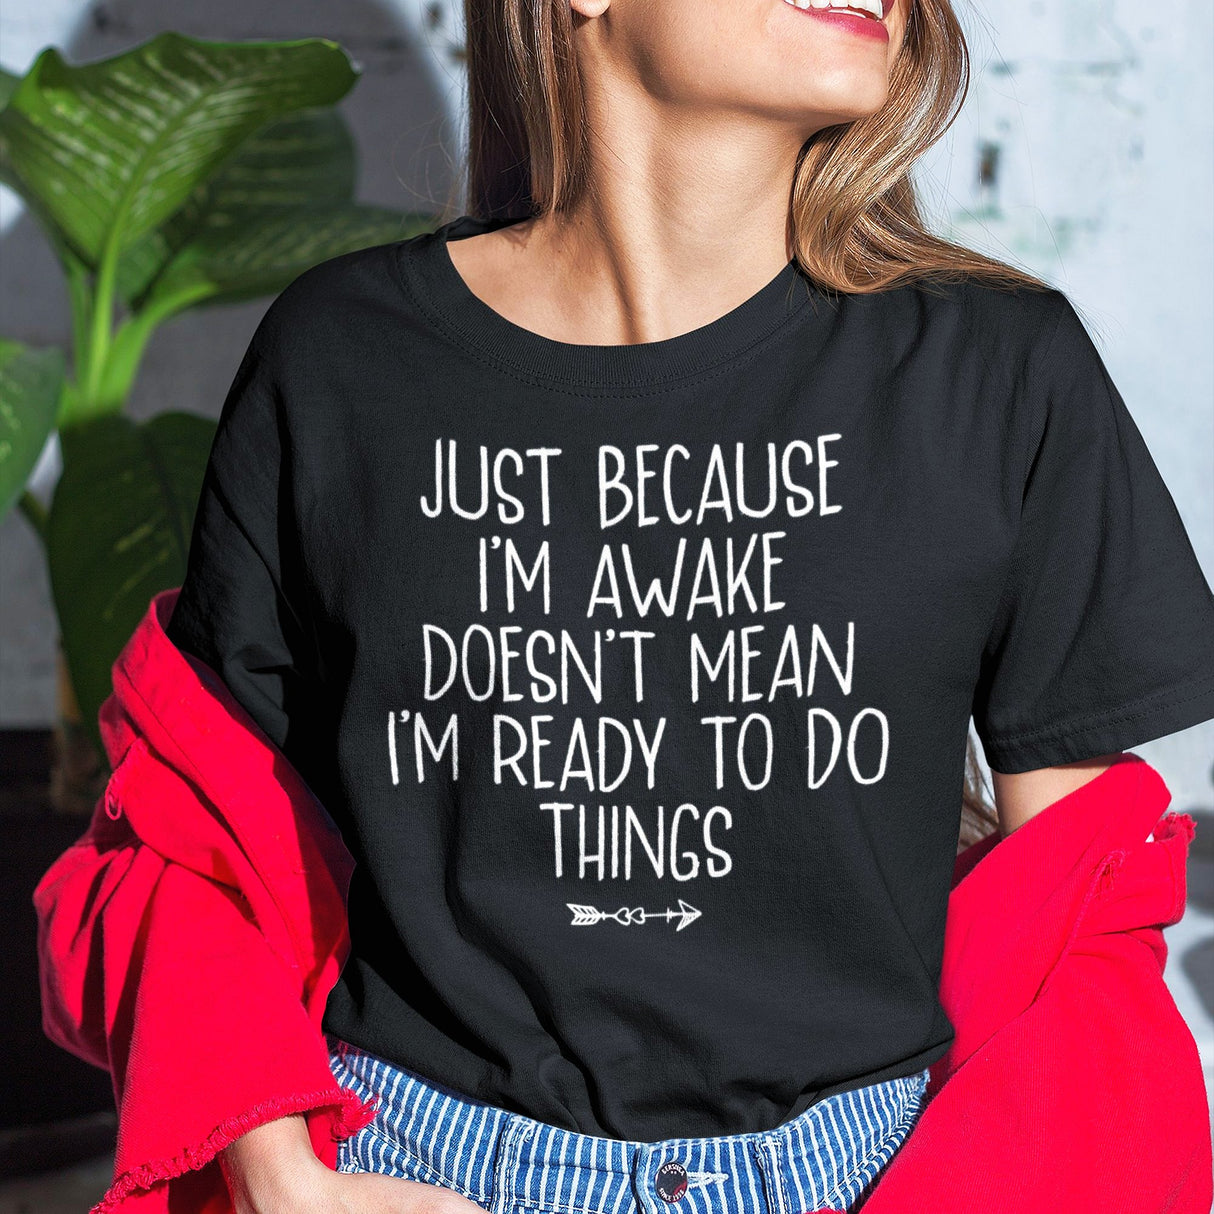 just-because-im-awake-doesnt-mean-im-ready-to-do-things-life-tee-alert-t-shirt-reluctant-tee-awake-t-shirt-unprepared-tee#color_black